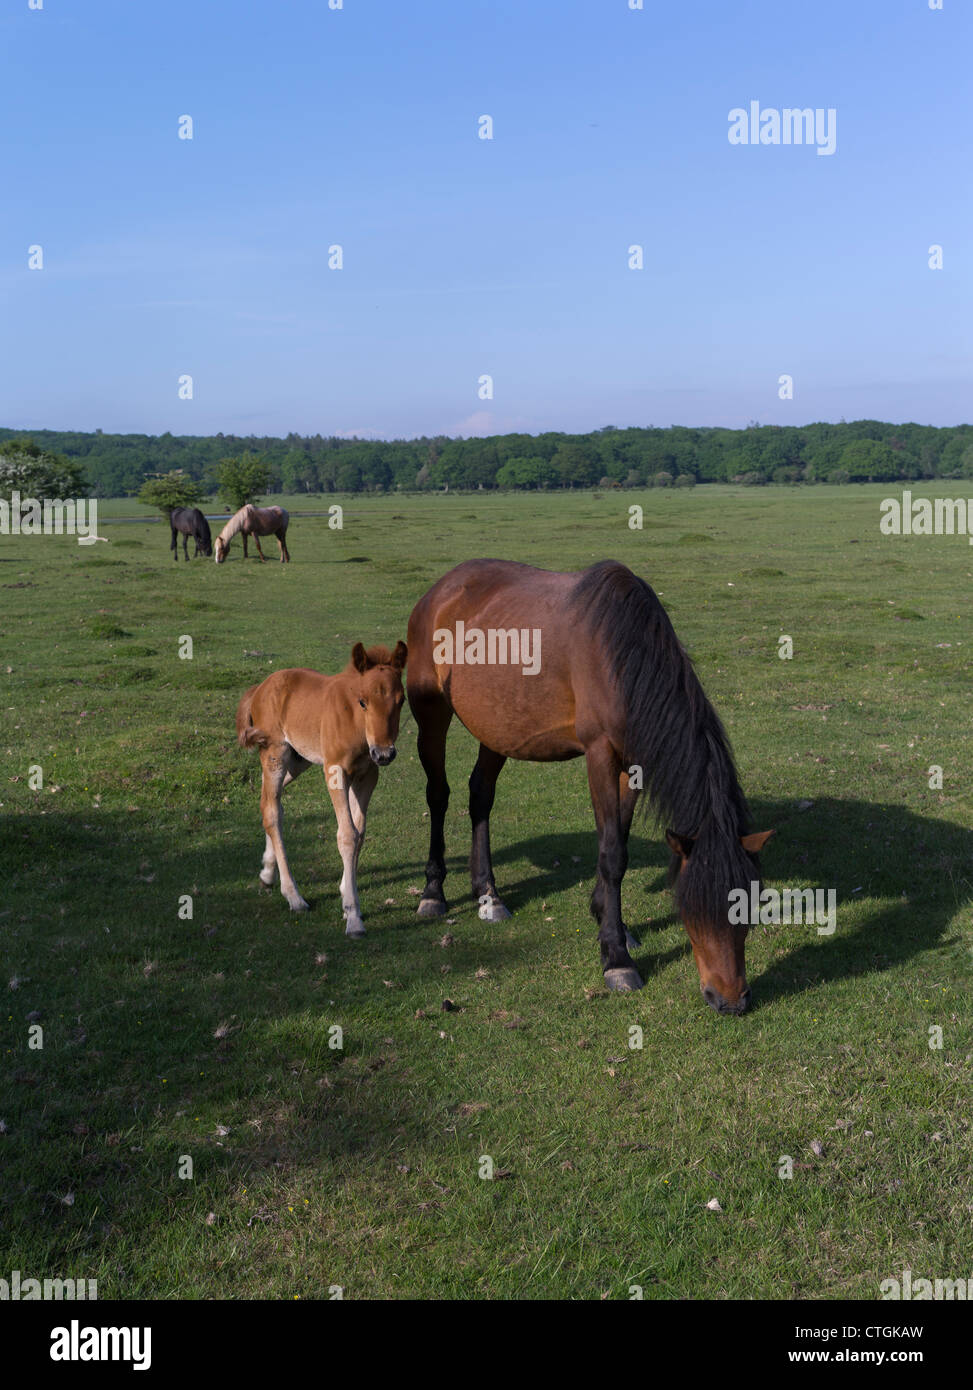 dh National Park NEW FOREST HAMPSHIRE New Forest pony and horse foal ponies grazing on common land in a field england horses country foals uk Stock Photo